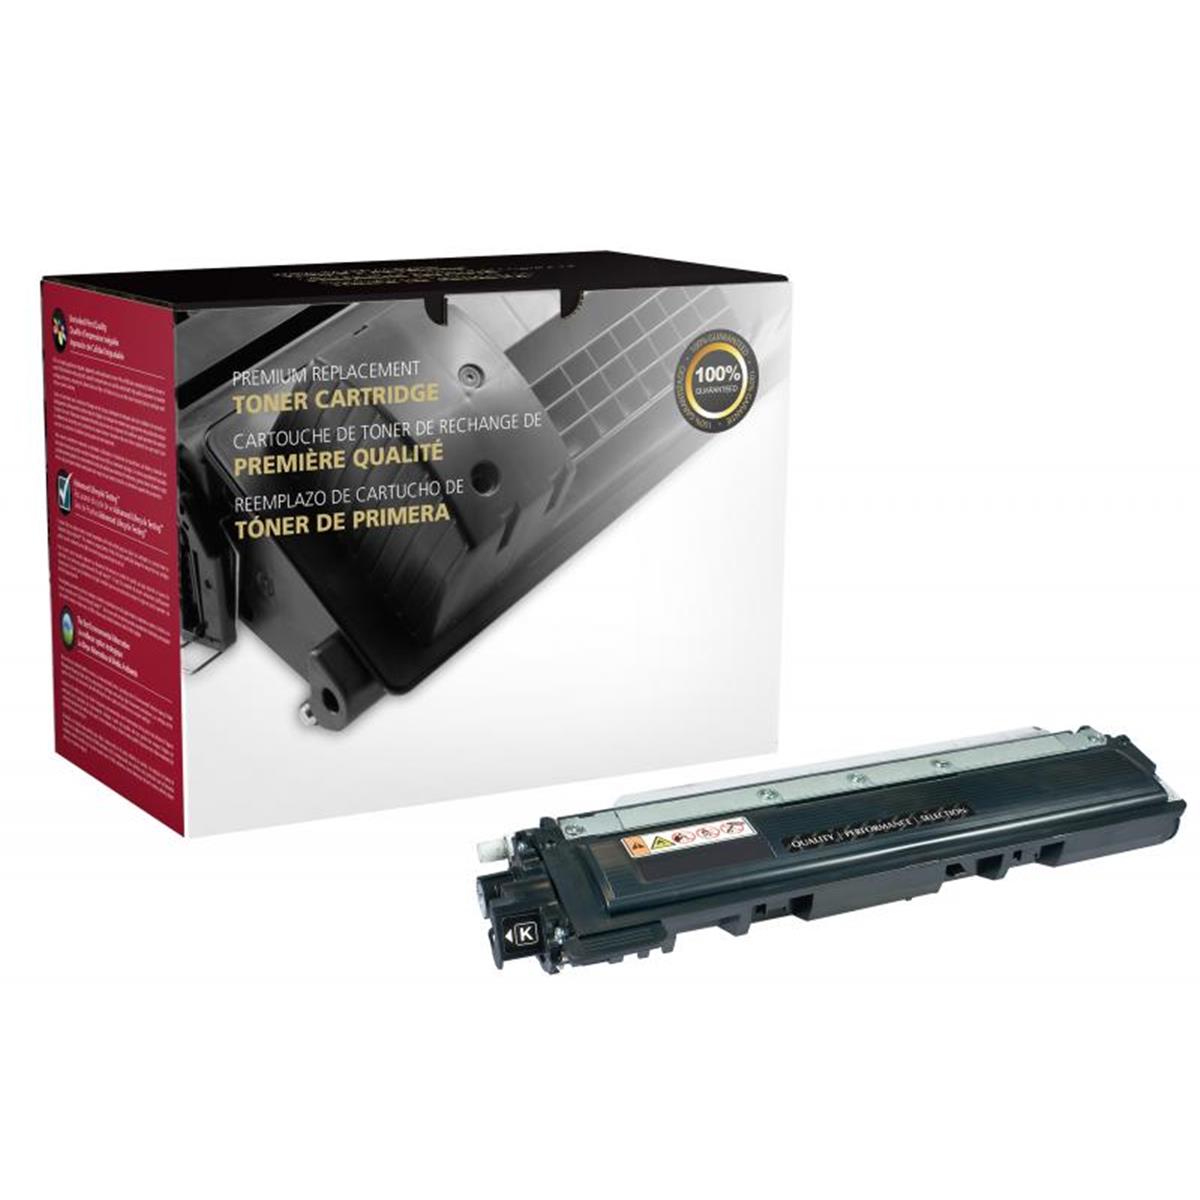 Picture of Brother 200469 Black Toner Cartridge for TN210